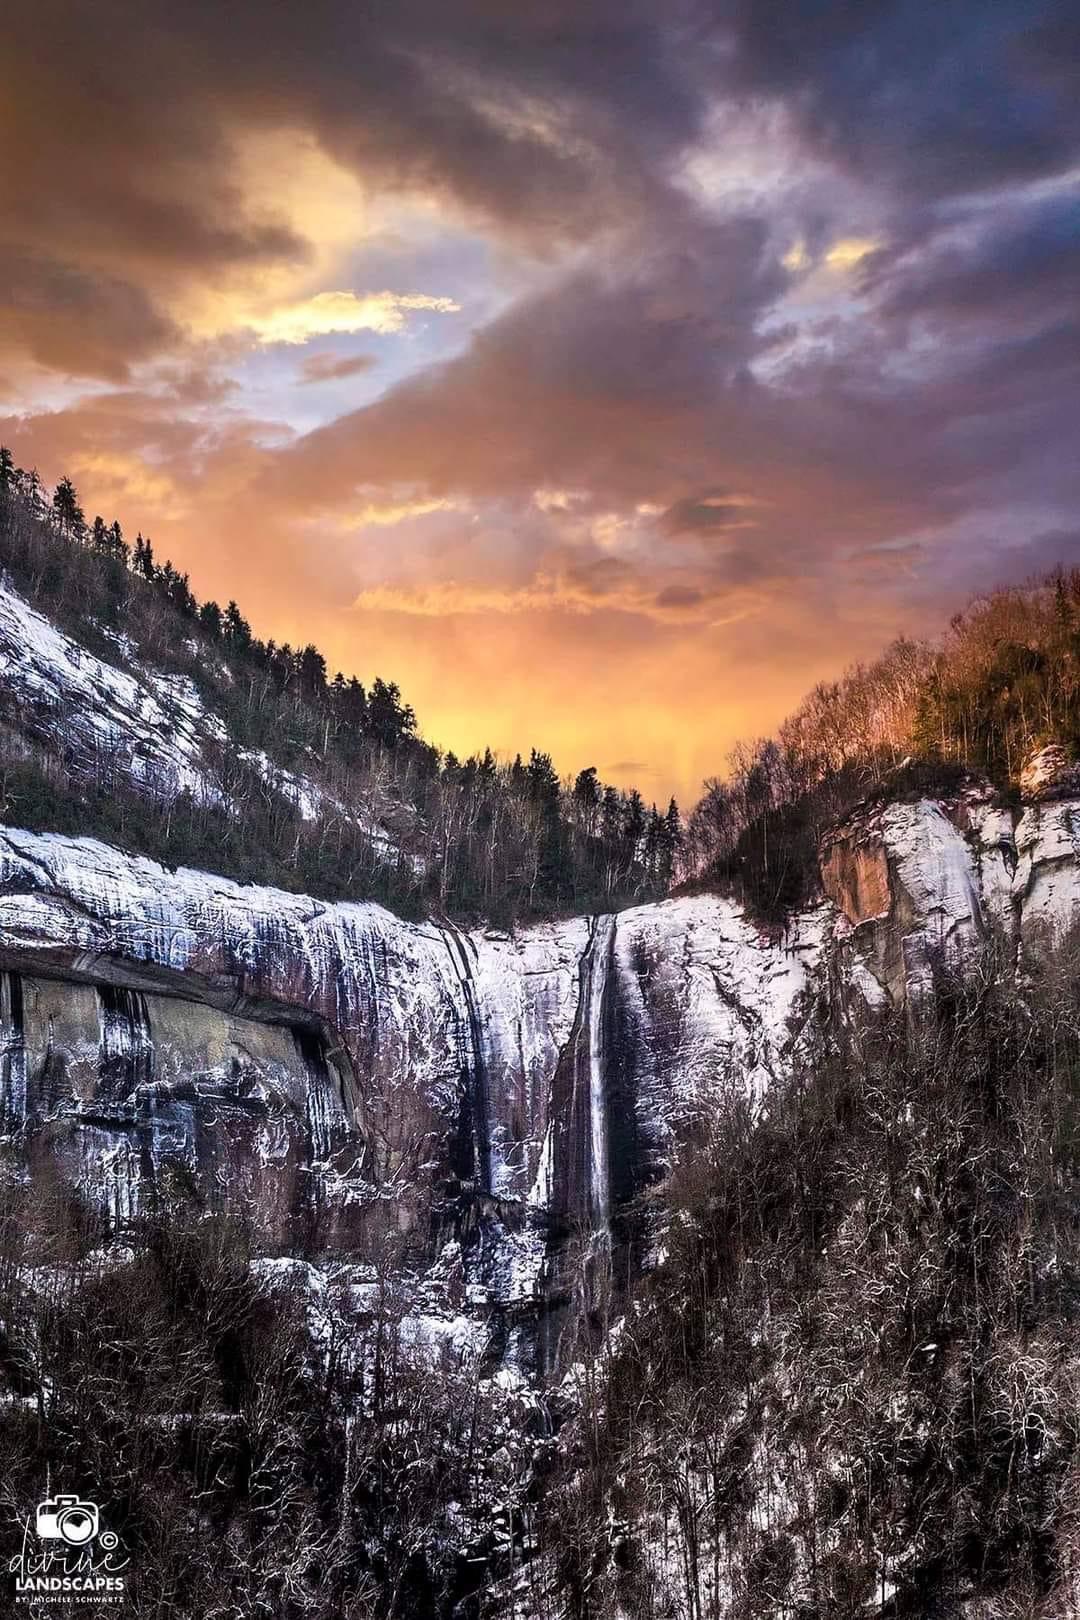 Hickory Nut Gorge: Home To One Of North Carolina’s Most Beautiful Parks & Two Charming Towns